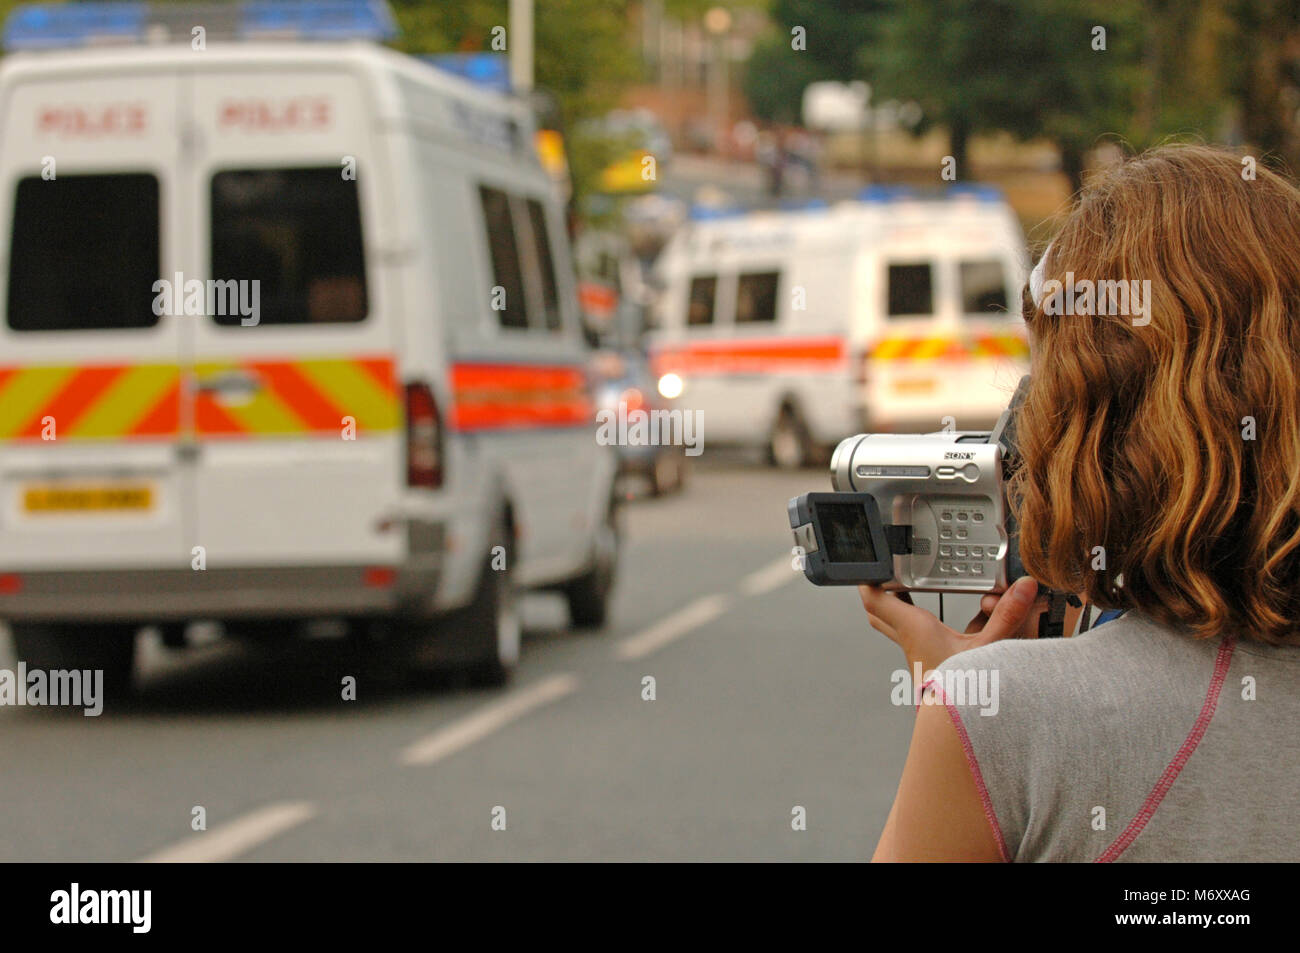 Member of the public filming on camcorder during police seige on a house South London related to the London July 2006 terrorist bombings. 23/7/06 Stock Photo